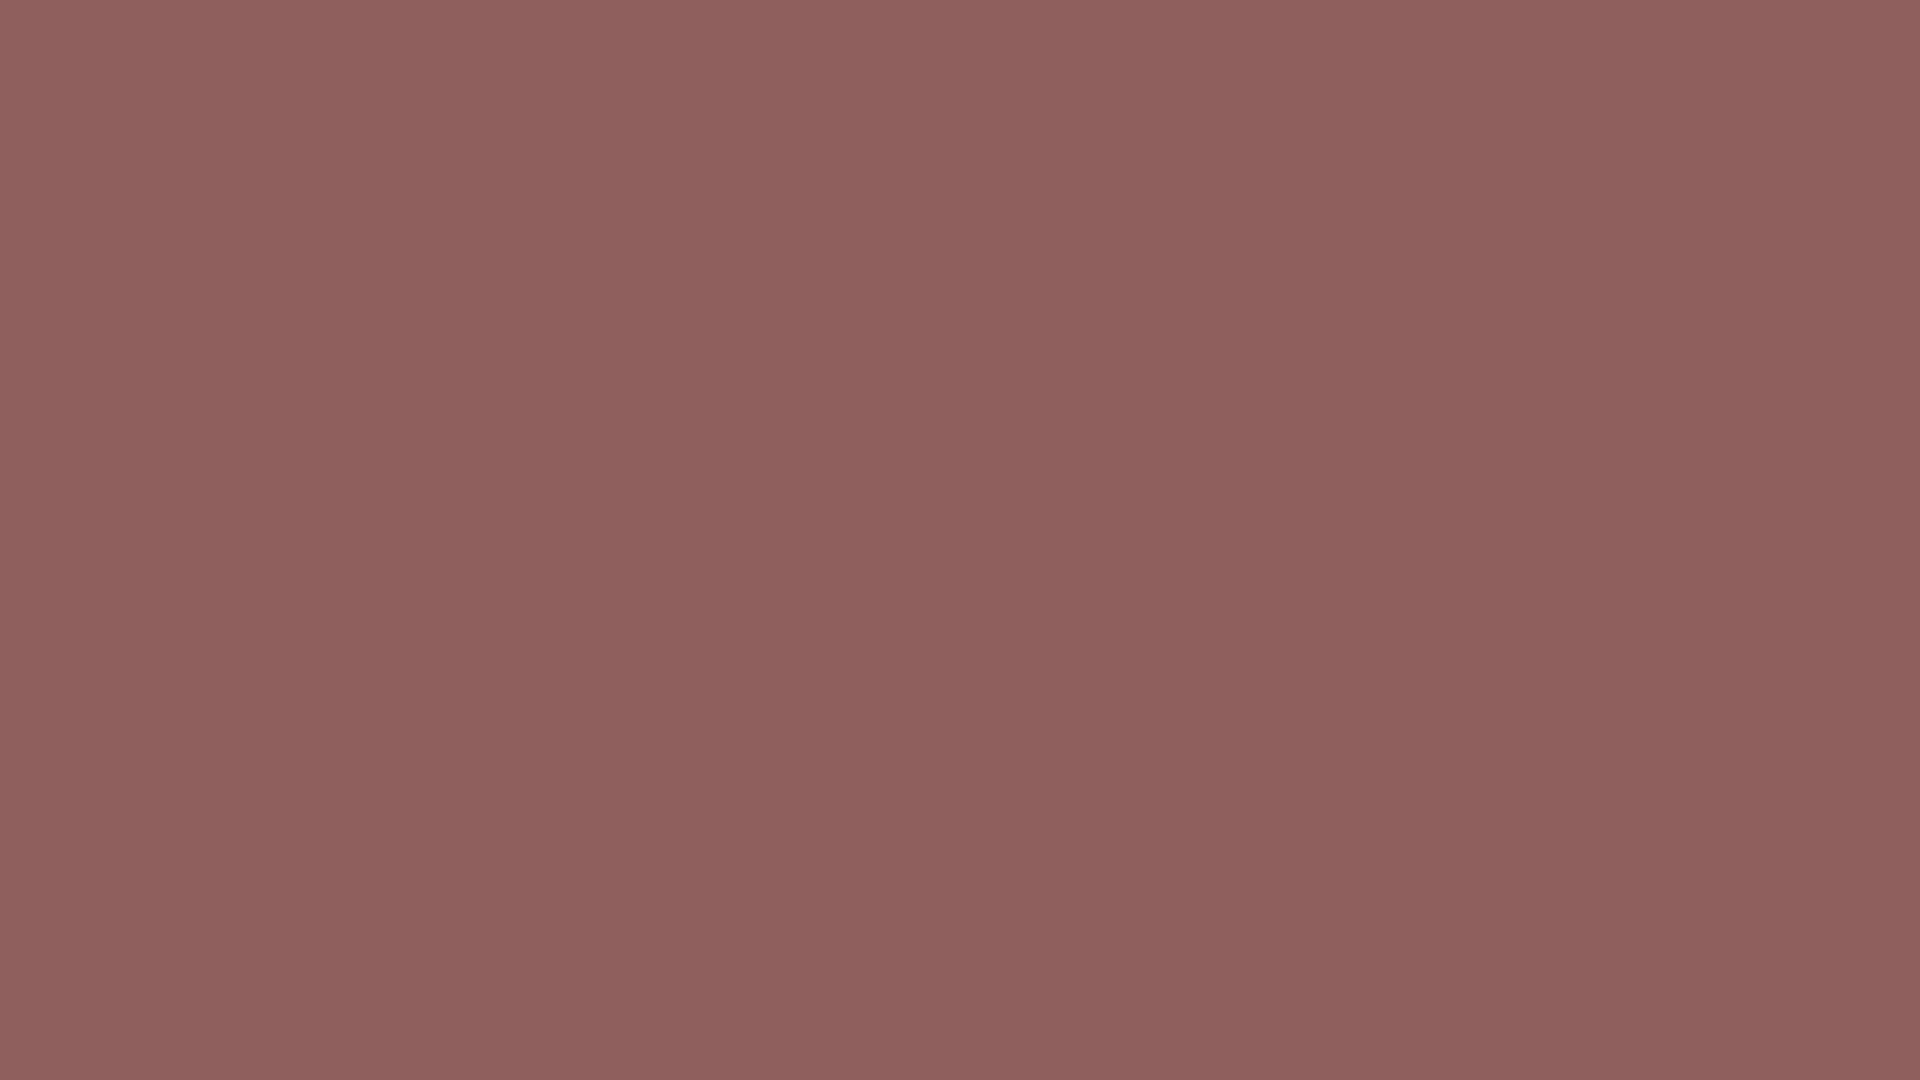 1920x1080 Rose Taupe Solid Color Background